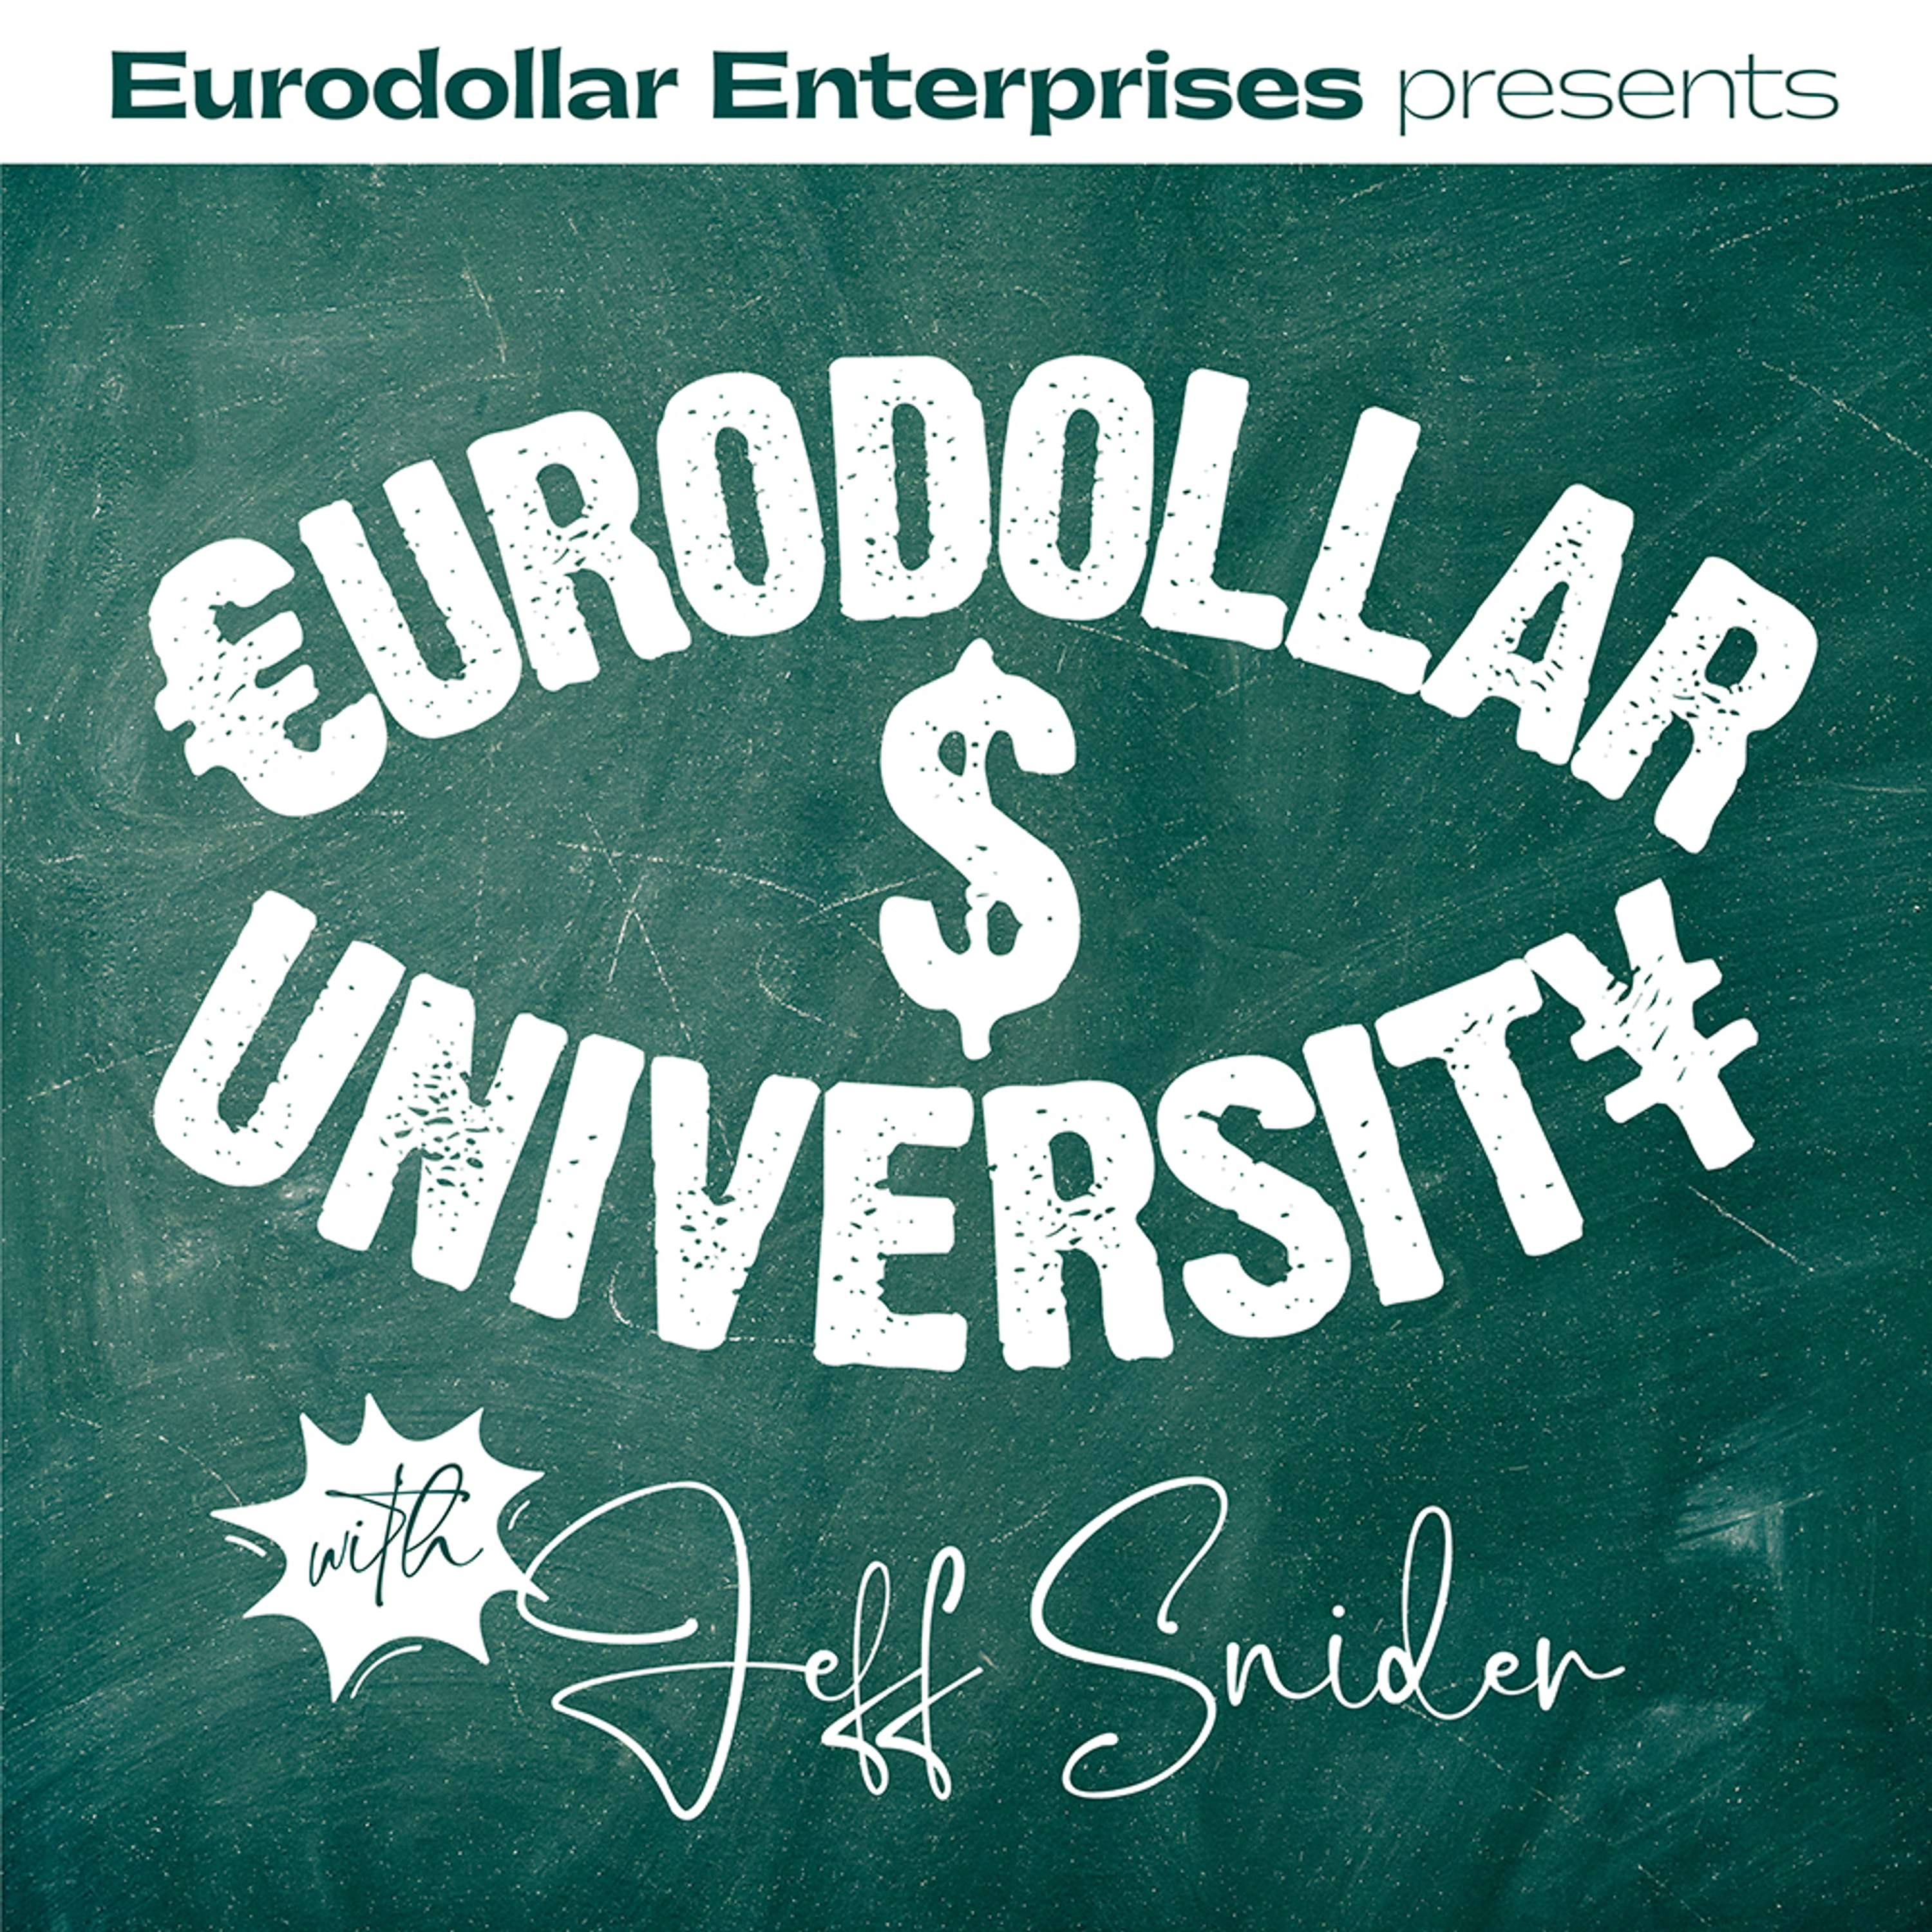 Interview with Macro Alf on Banks, Collateral [Eurodollar University, Ep. 224]